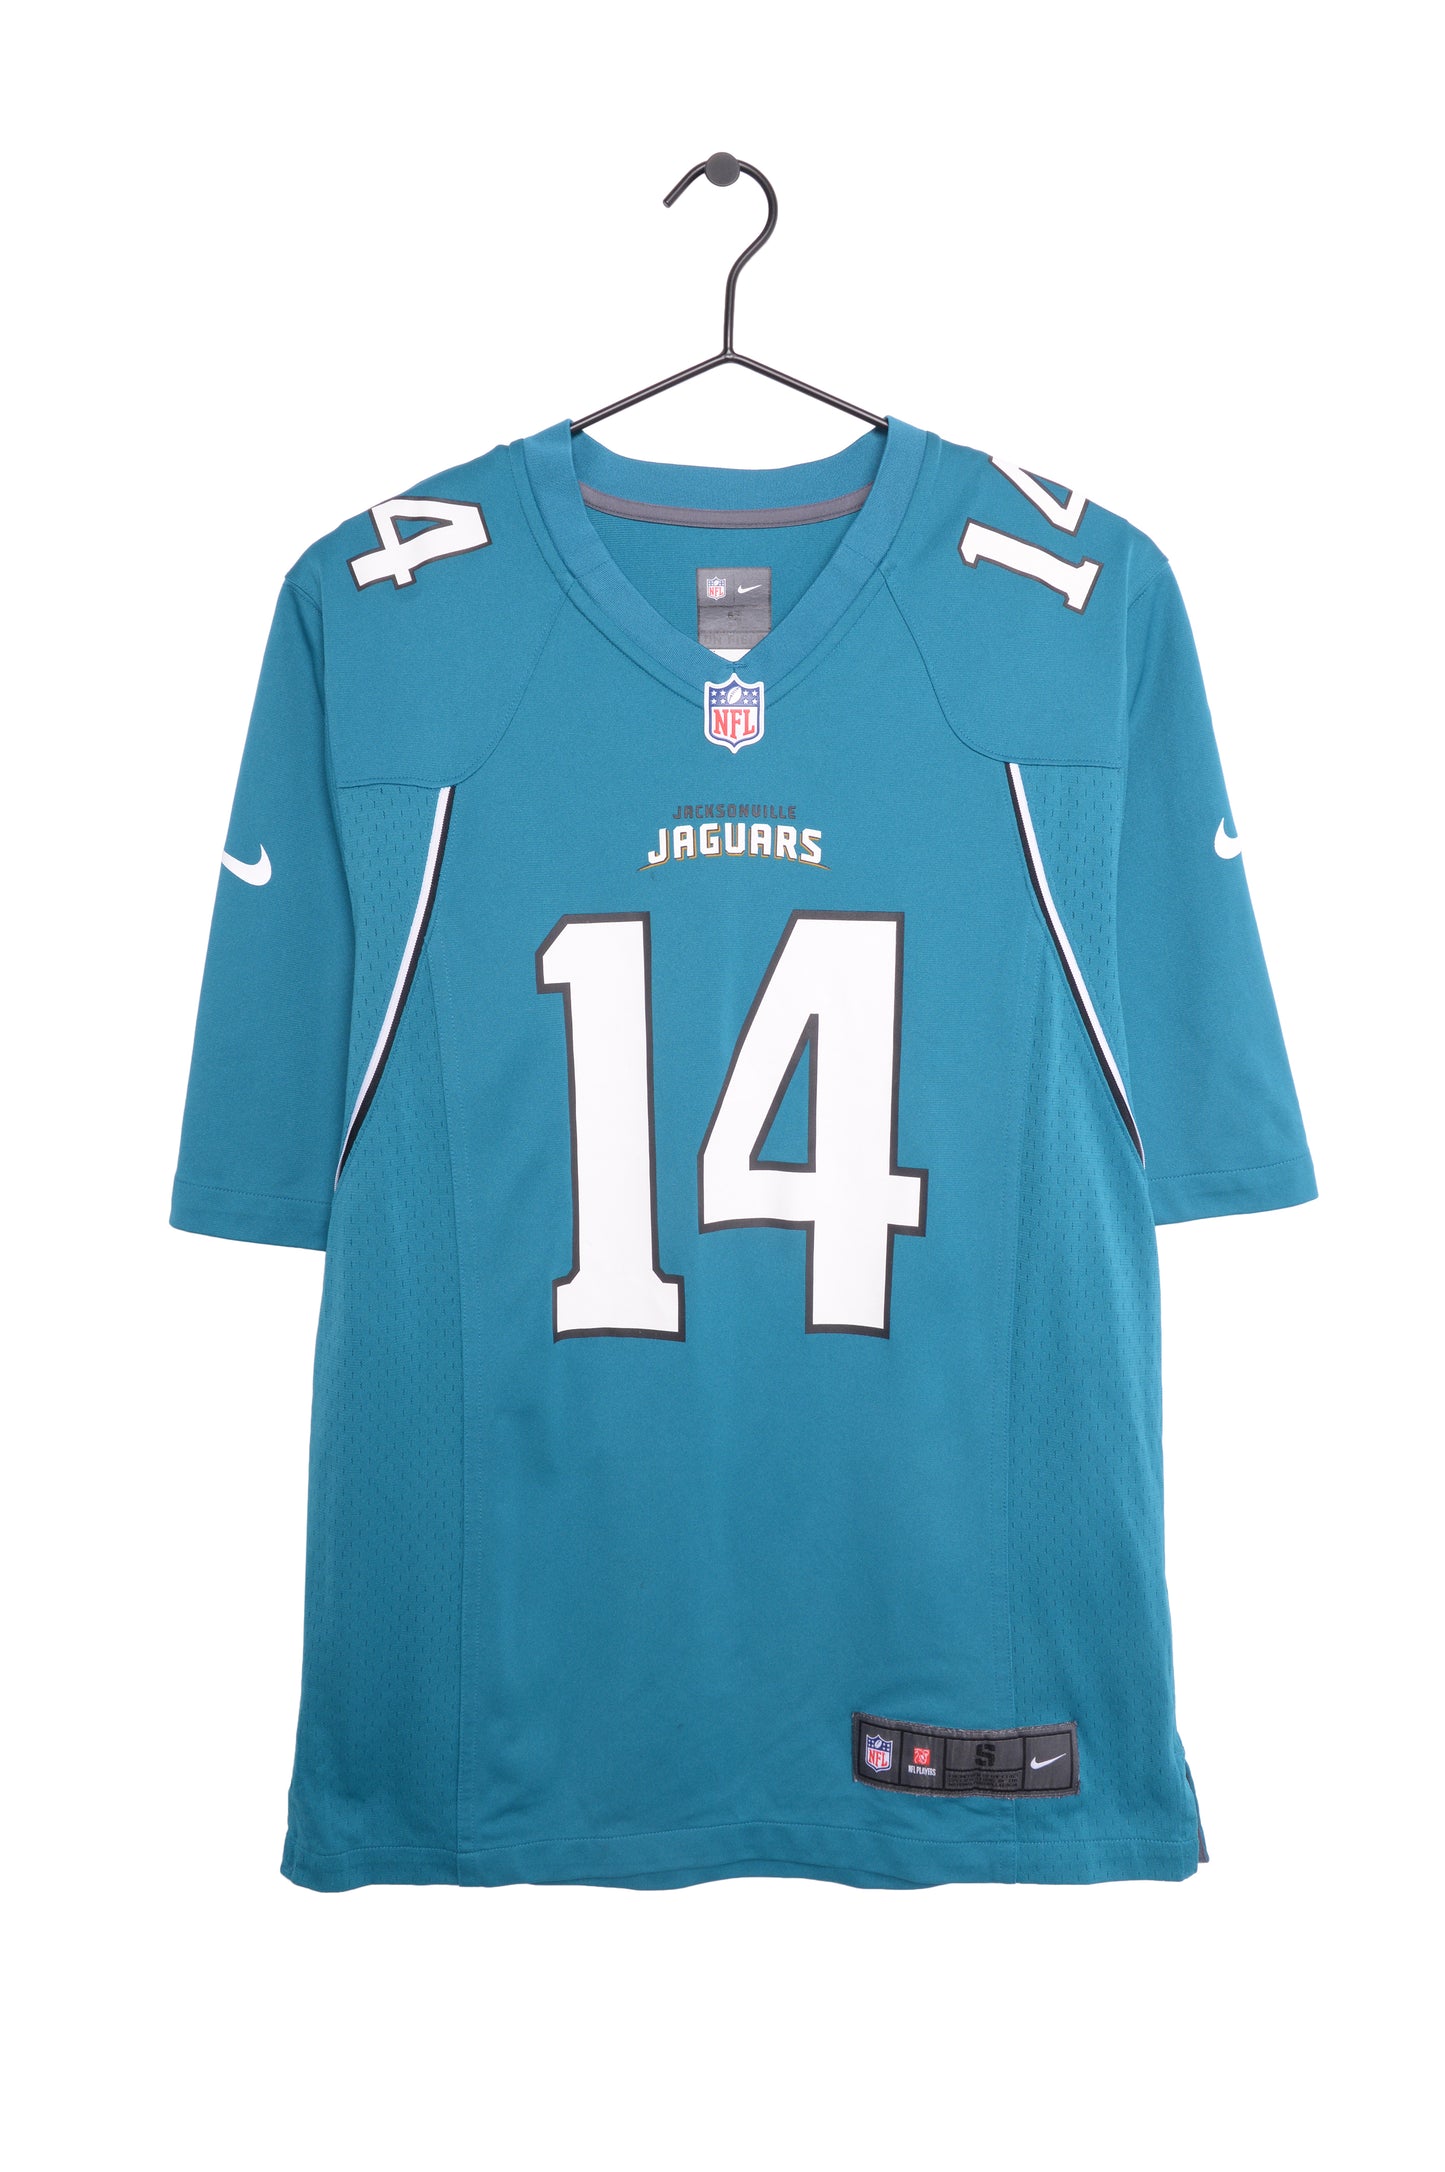 Which Jacksonville Jaguars jersey should I buy for the new season?